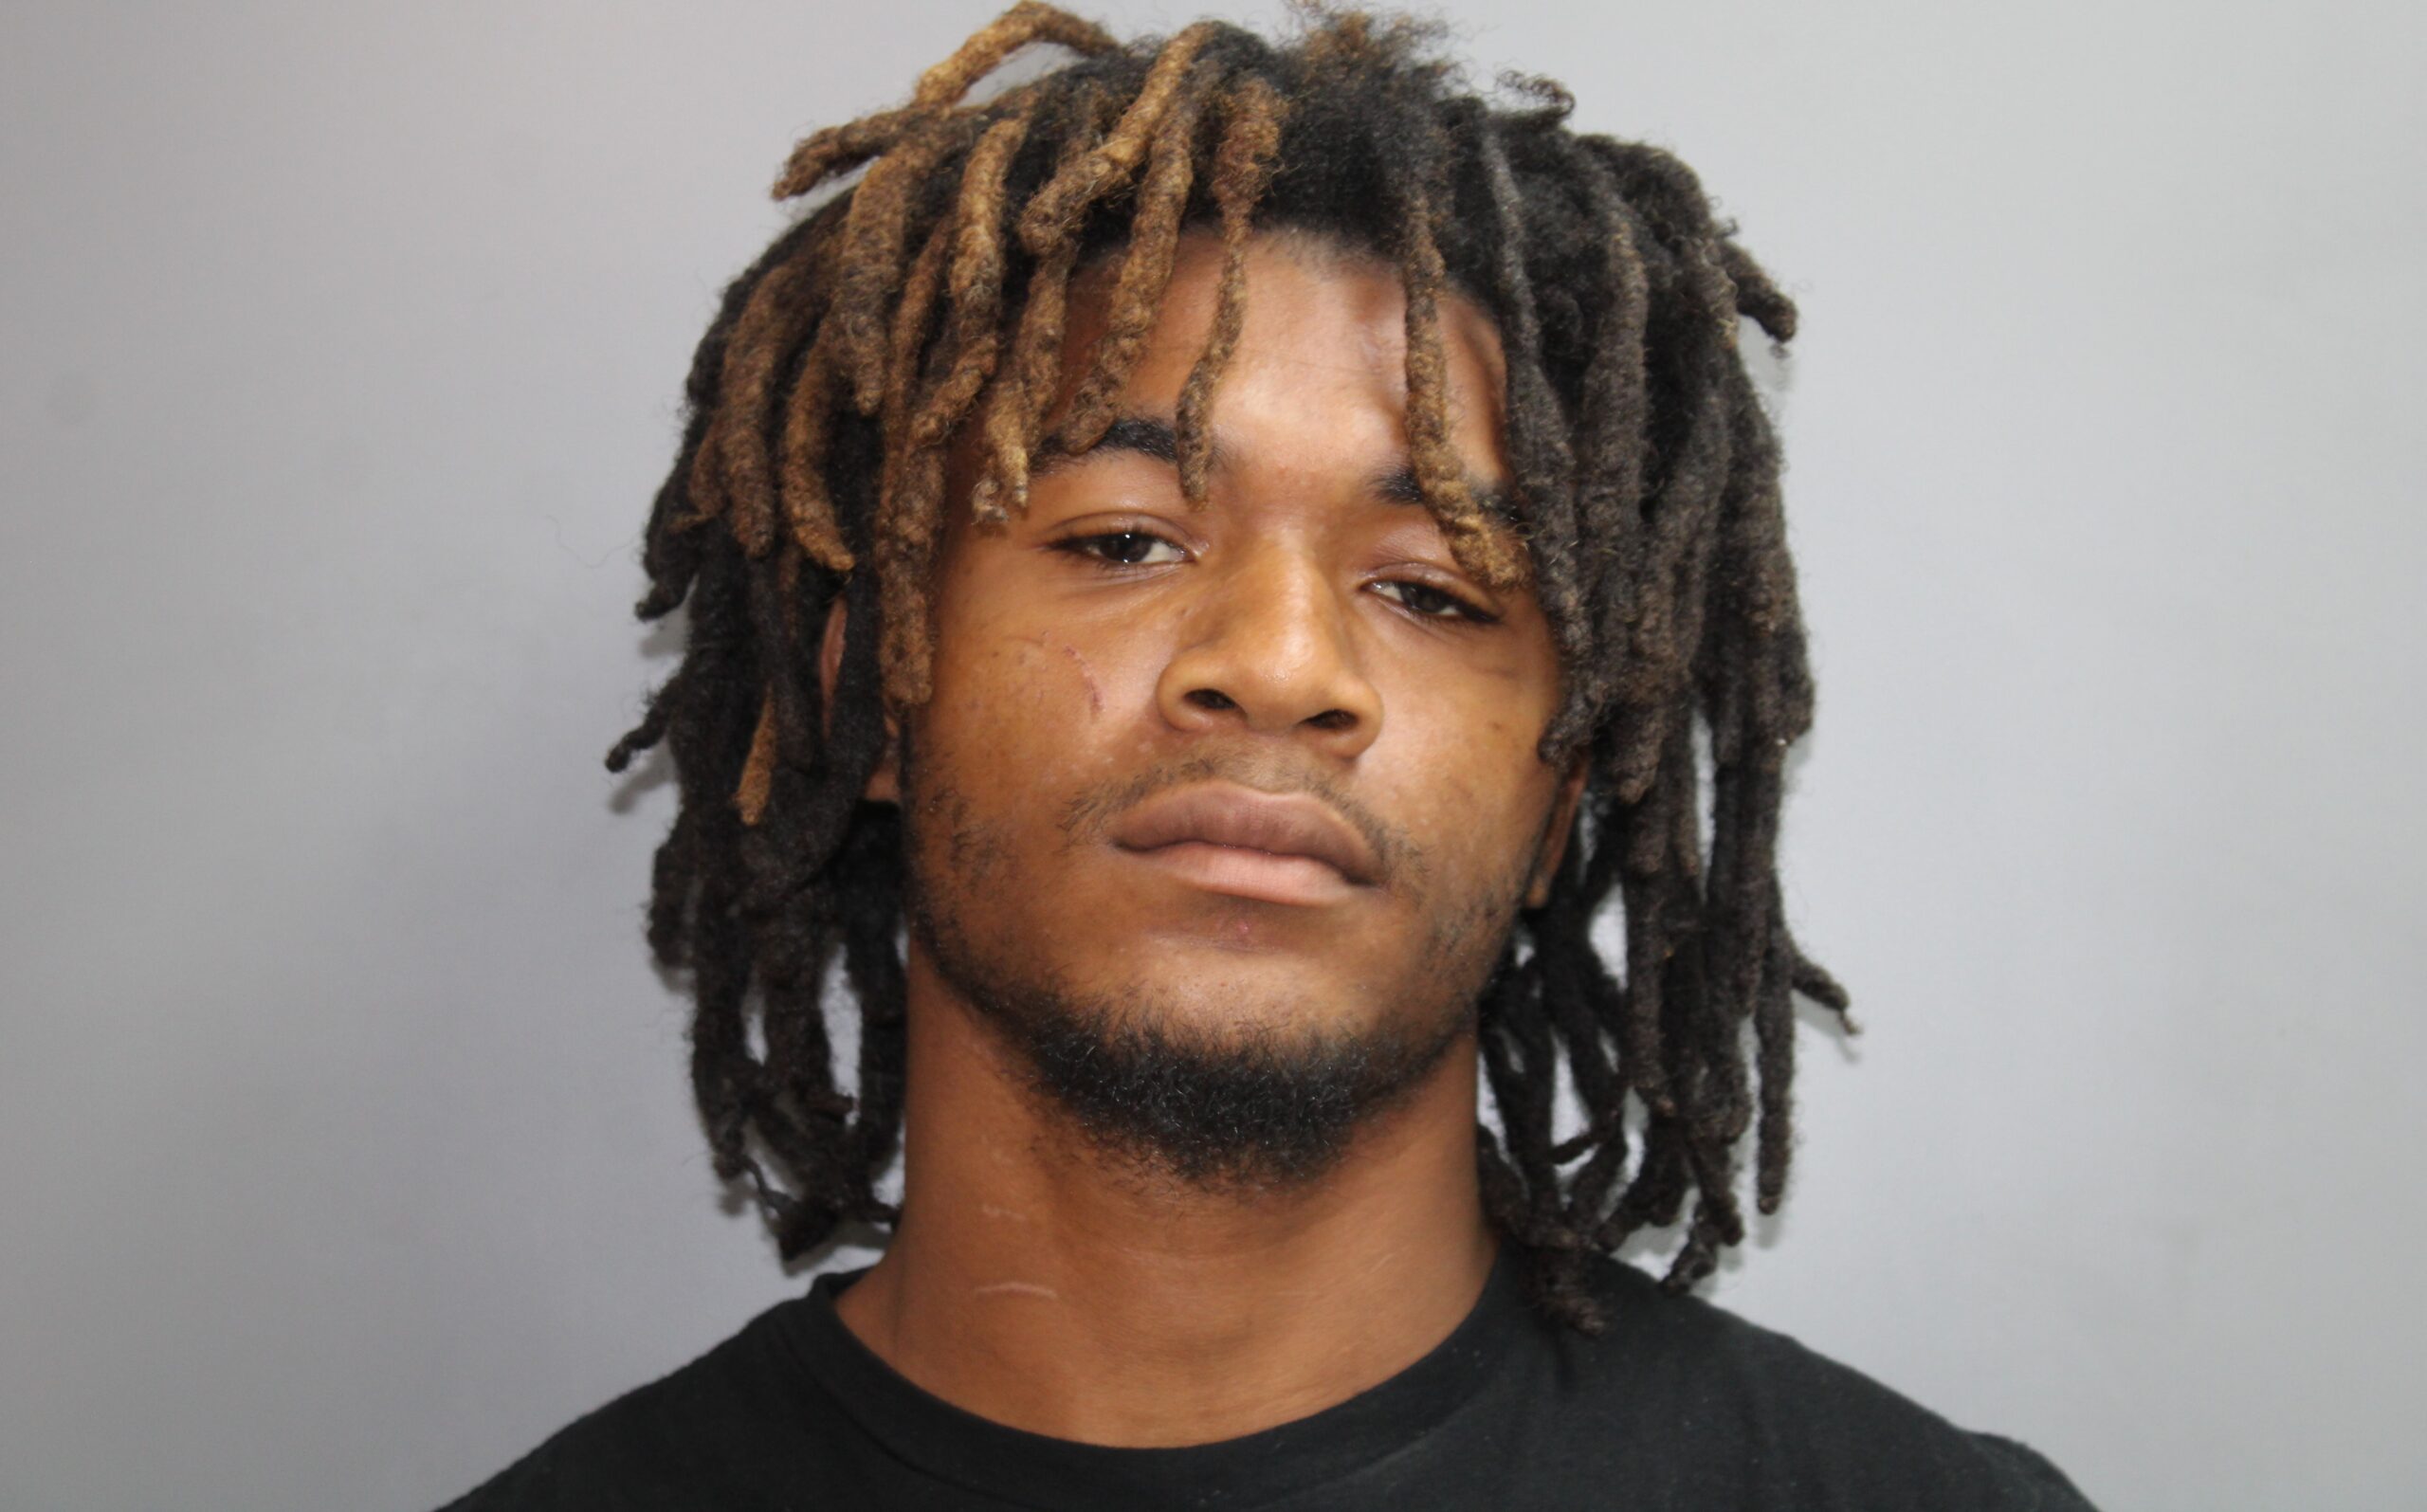 St. Croix Man Wanted For Attempted Murder Surrenders To Police